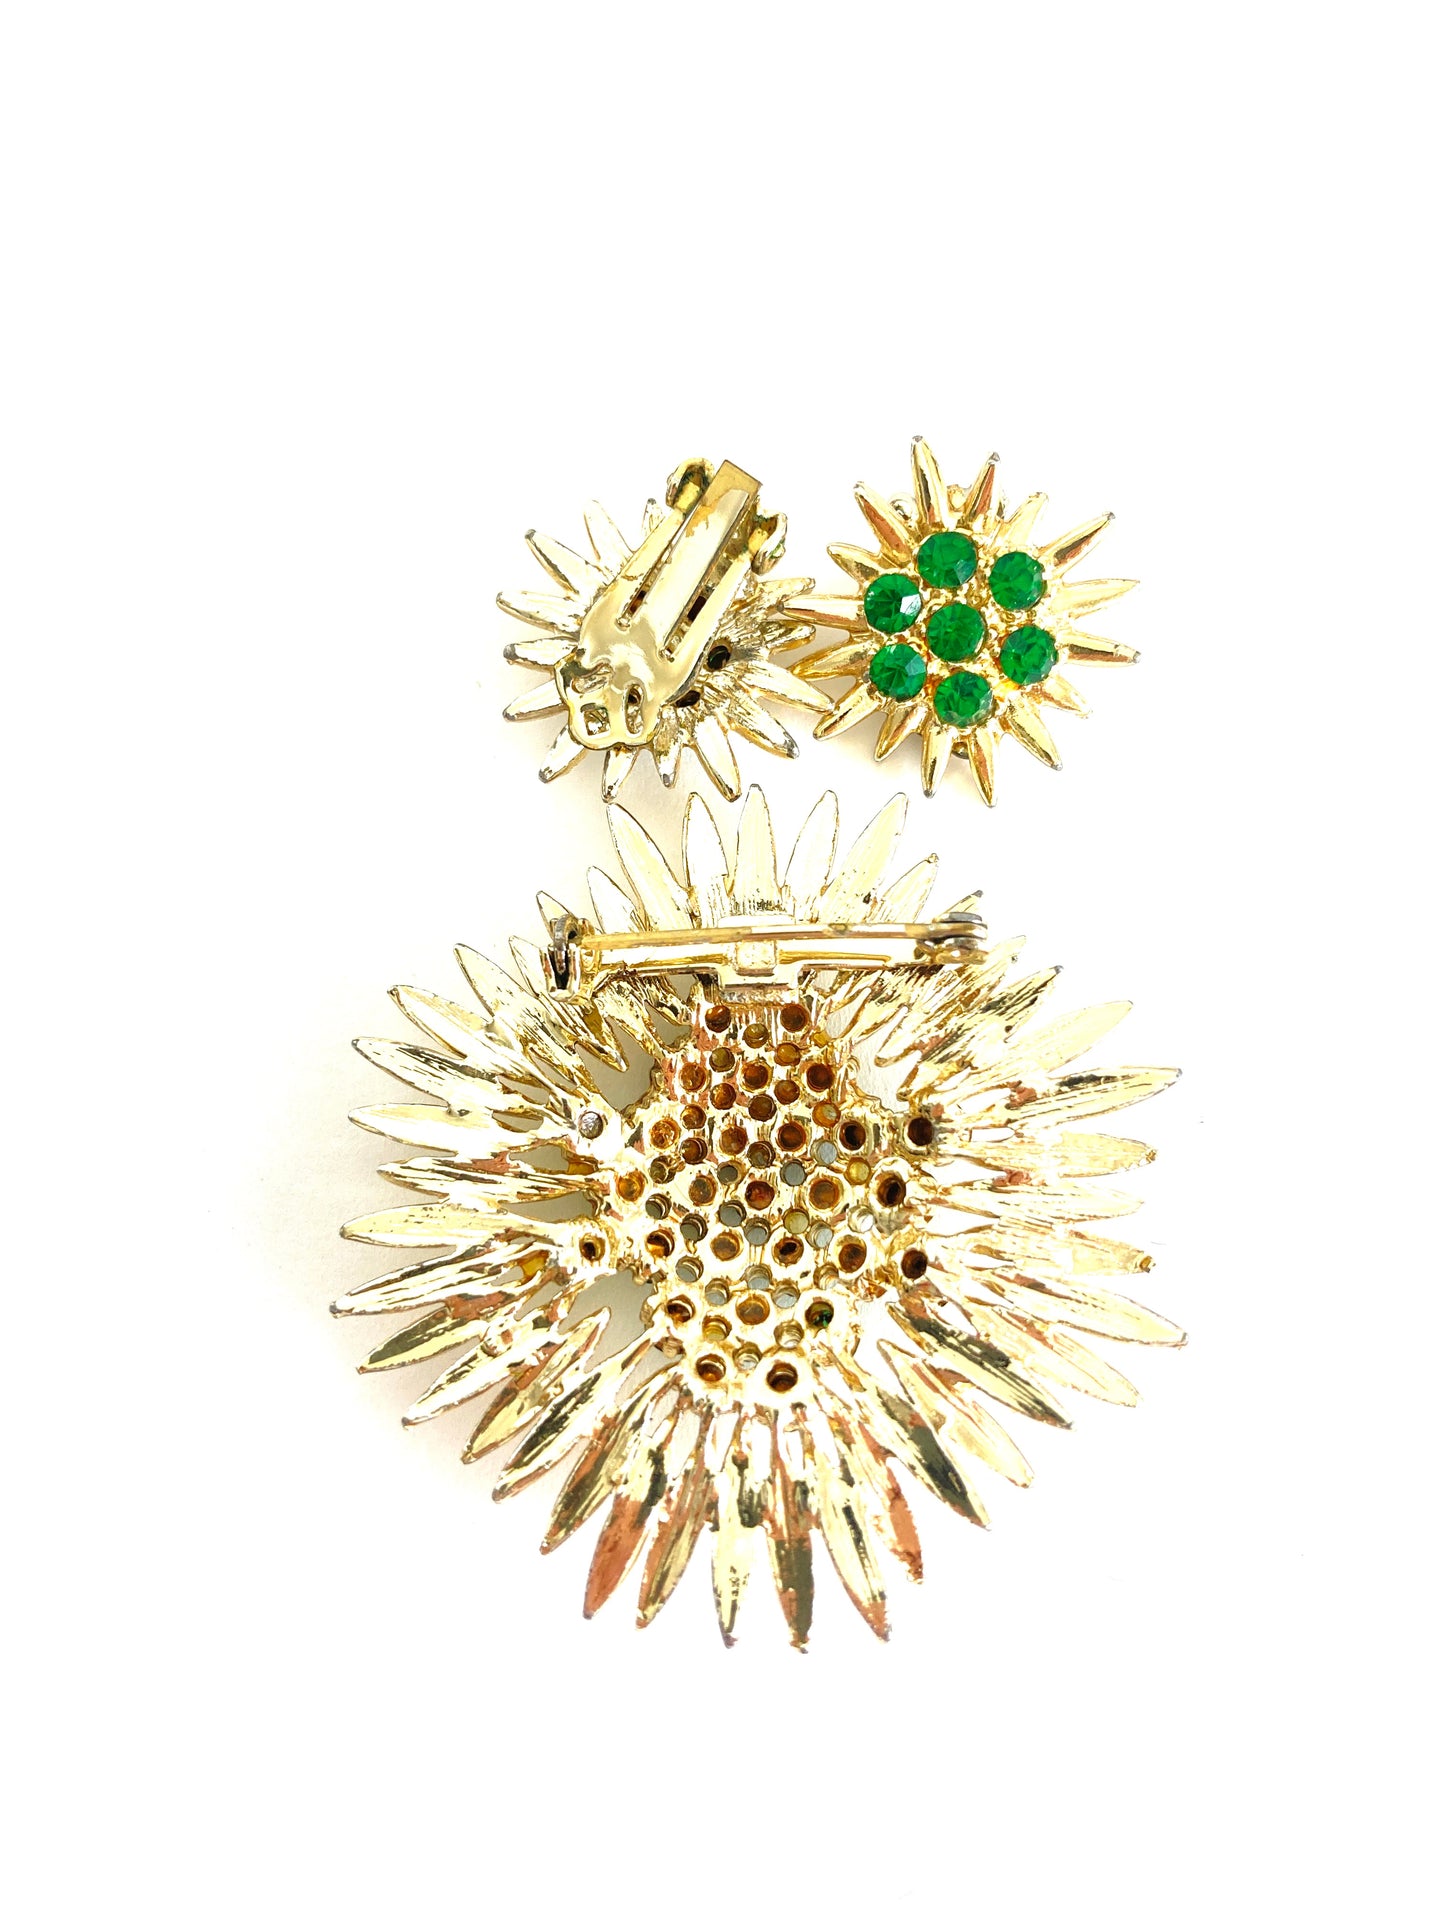 Starburst Brooch and Earrings Set in Green and Gold